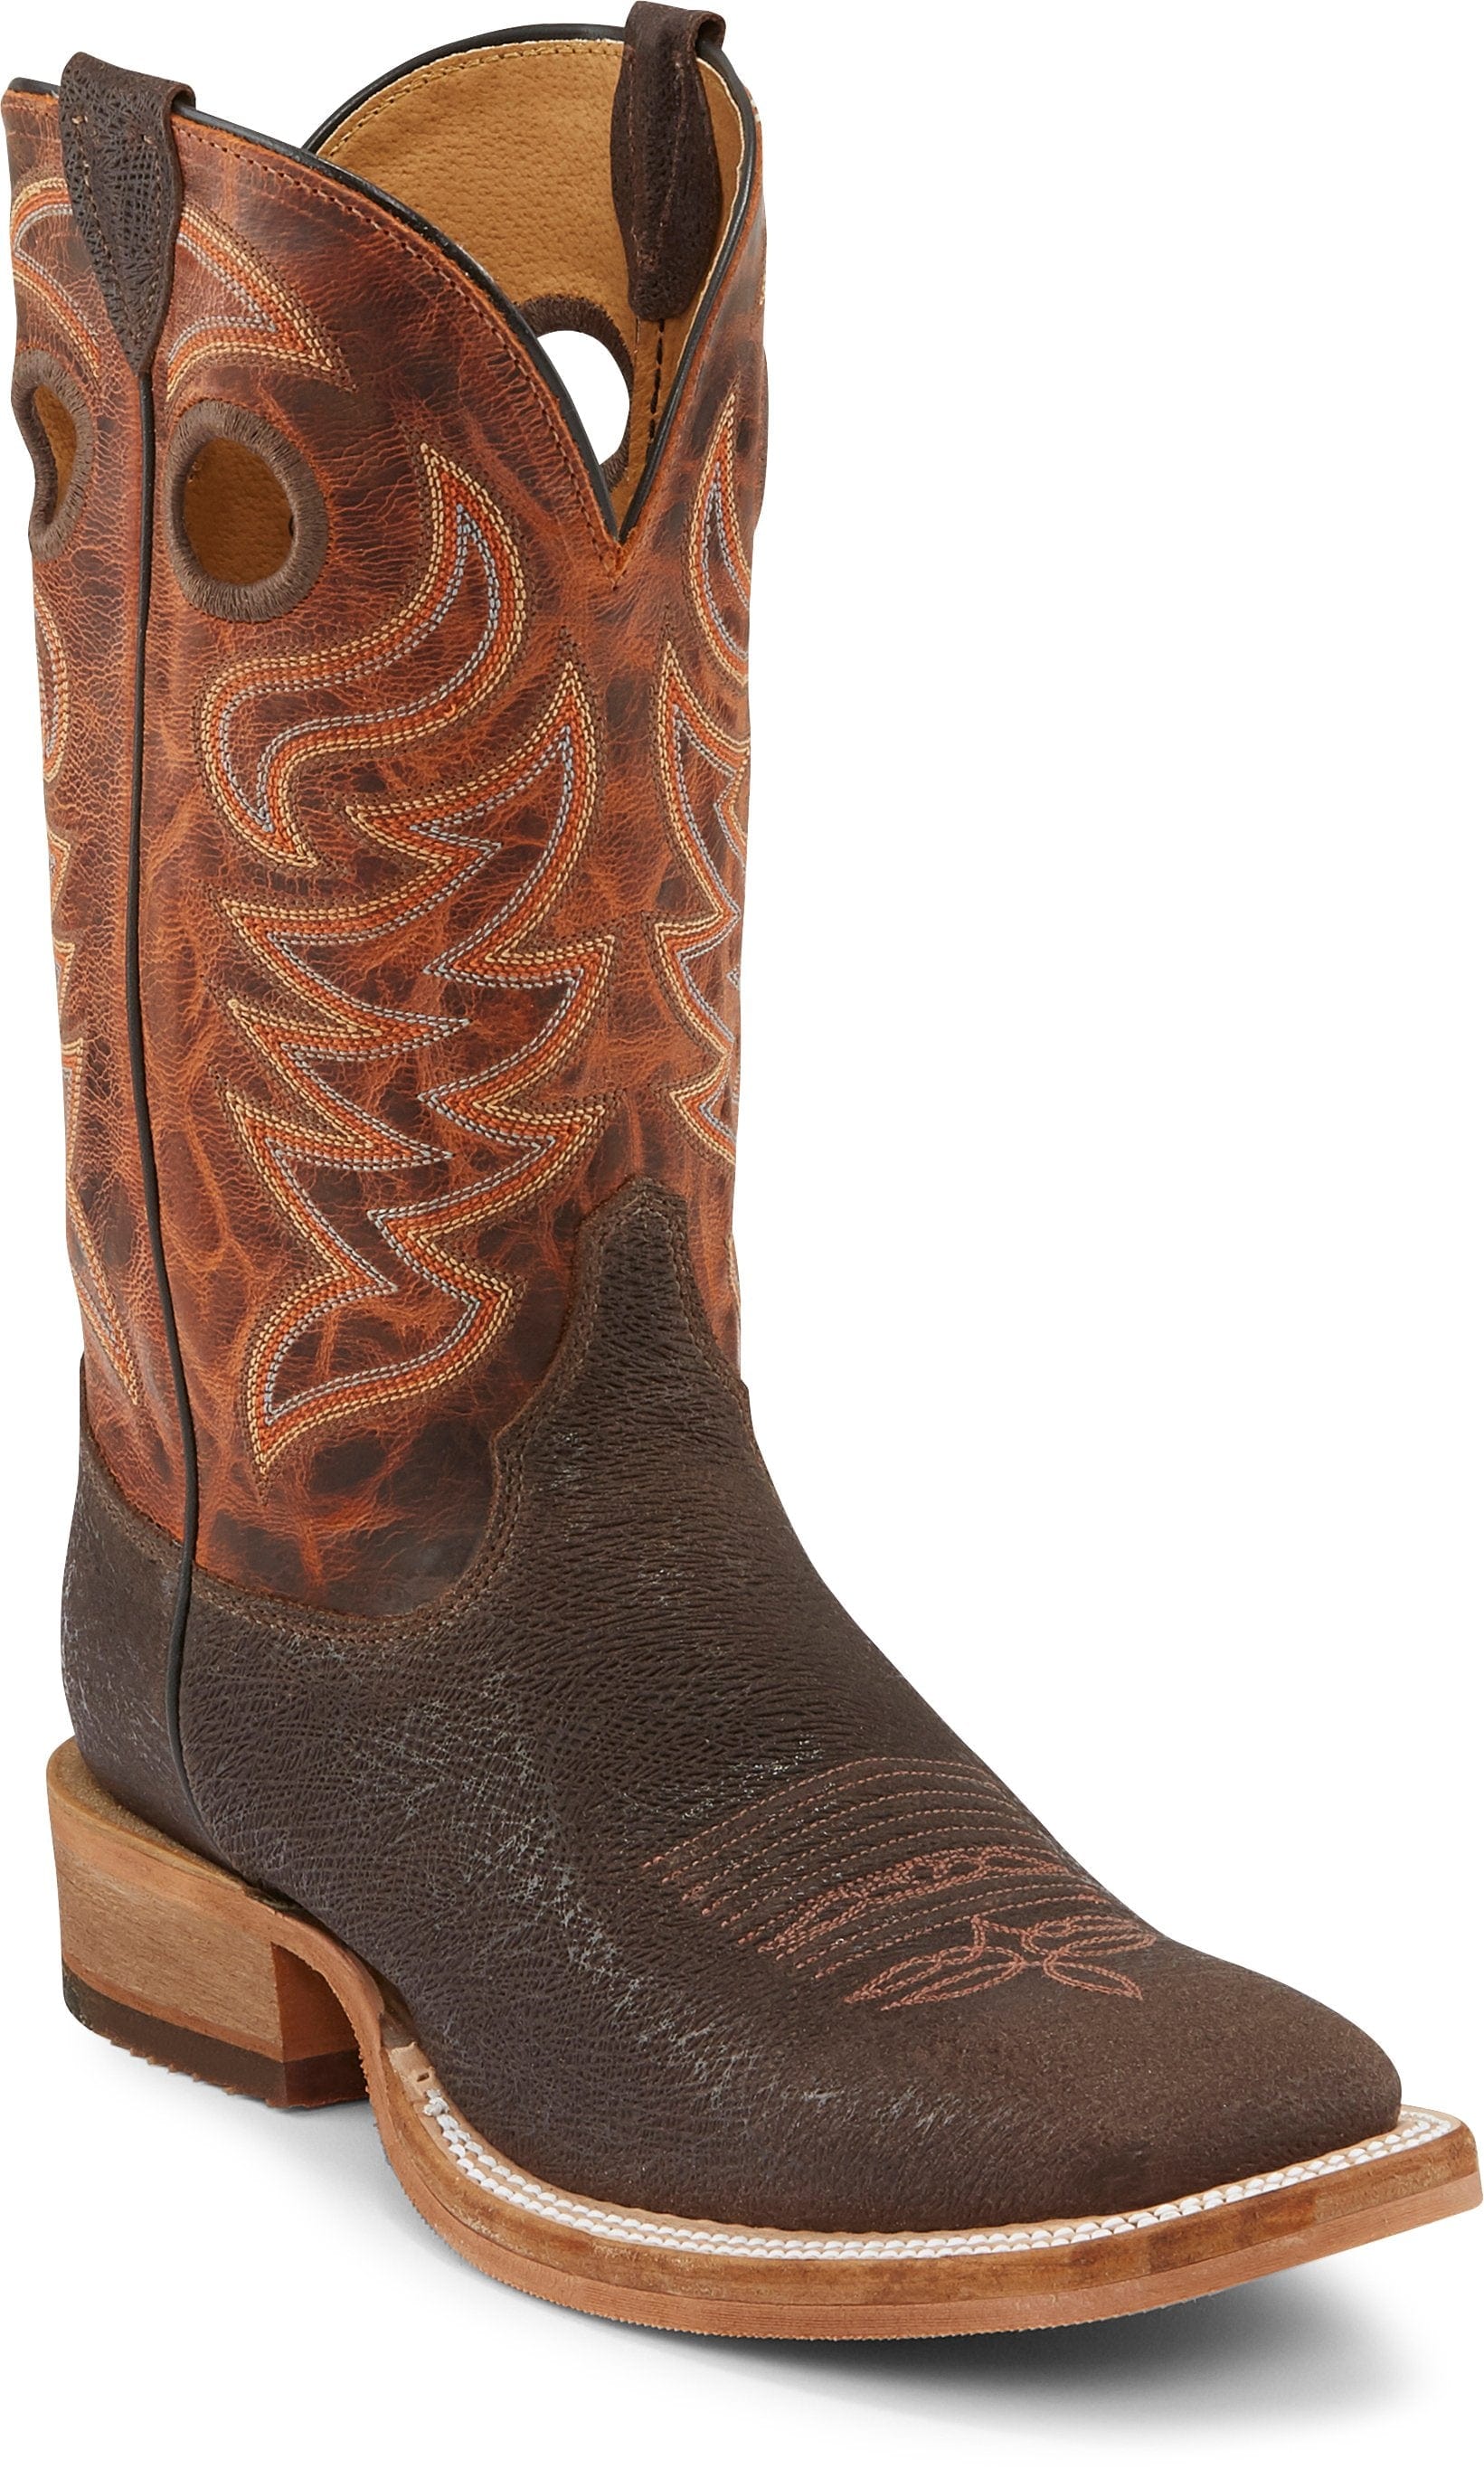 Justin Boots Boots Justin Men’s Bent Rail Caddo Brown Stone Square toe Western Boots BR777